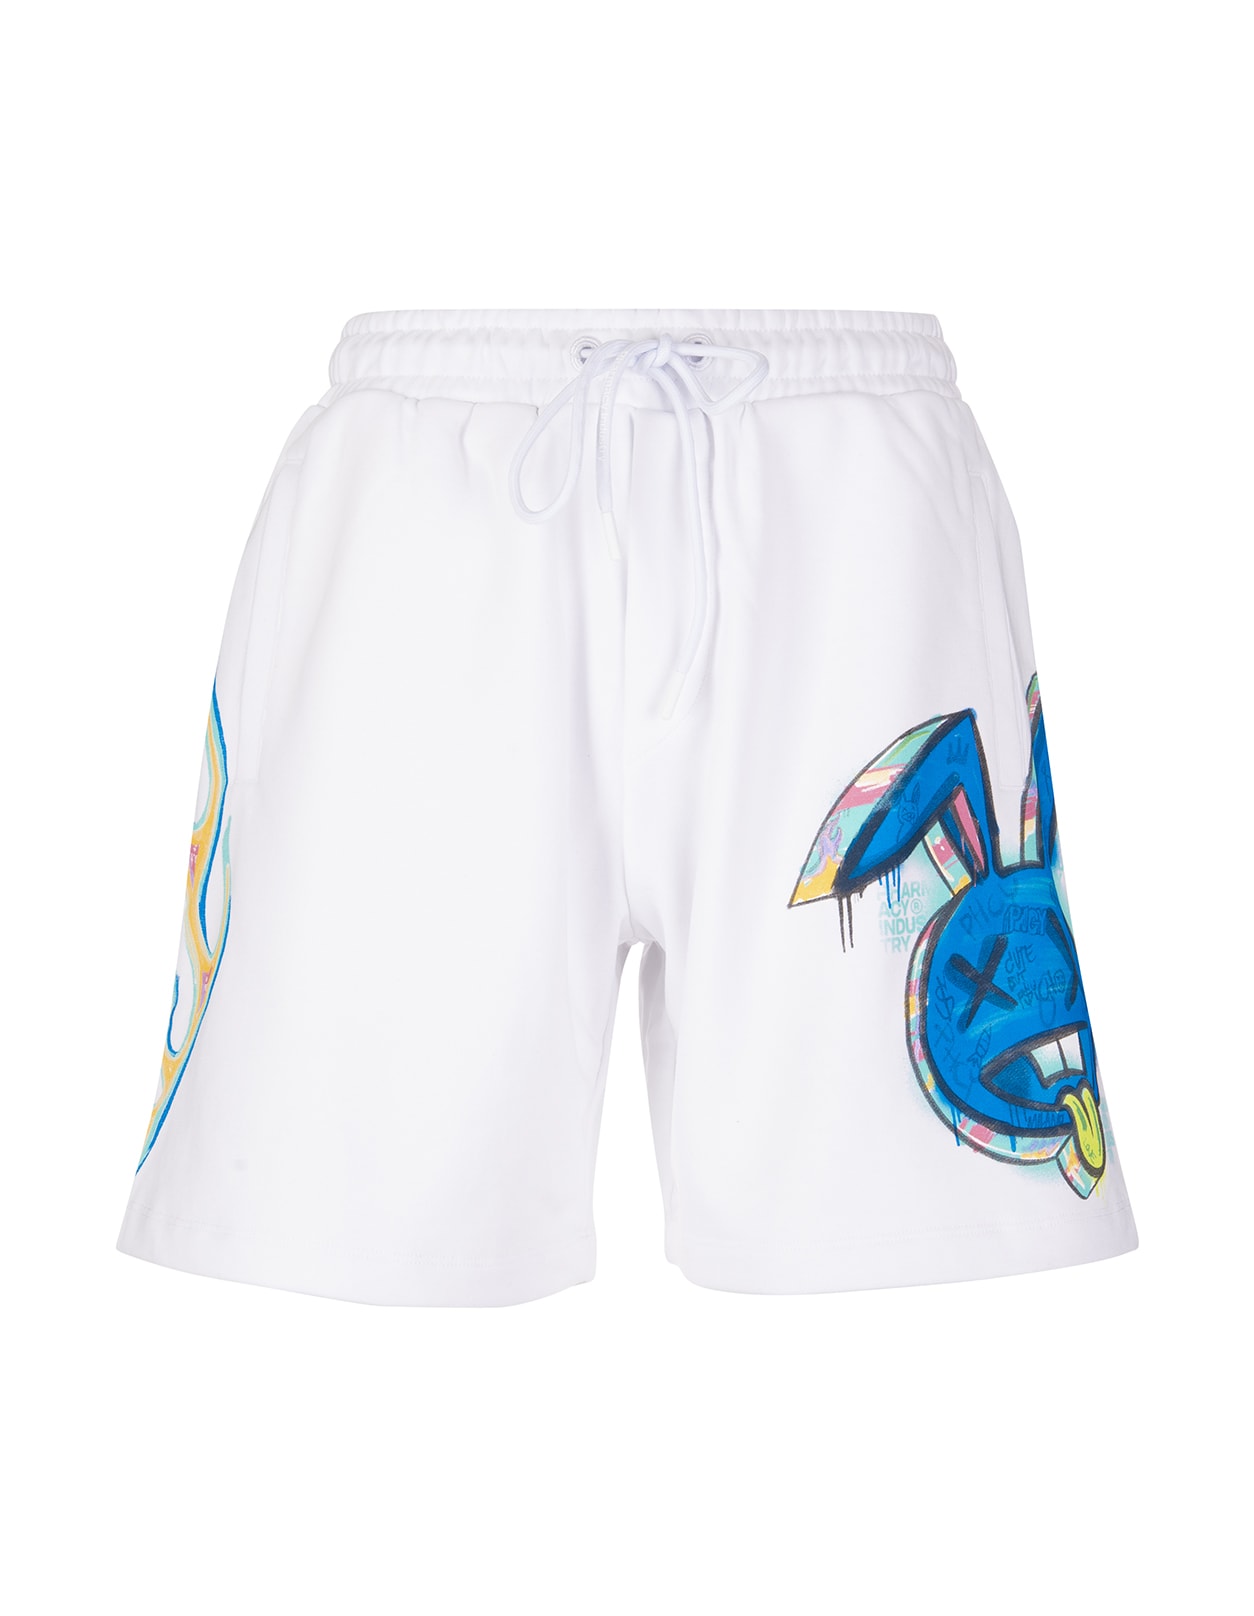 Pharmacy Industry Man White Sports Shorts With Xanny Logo Graphic Print